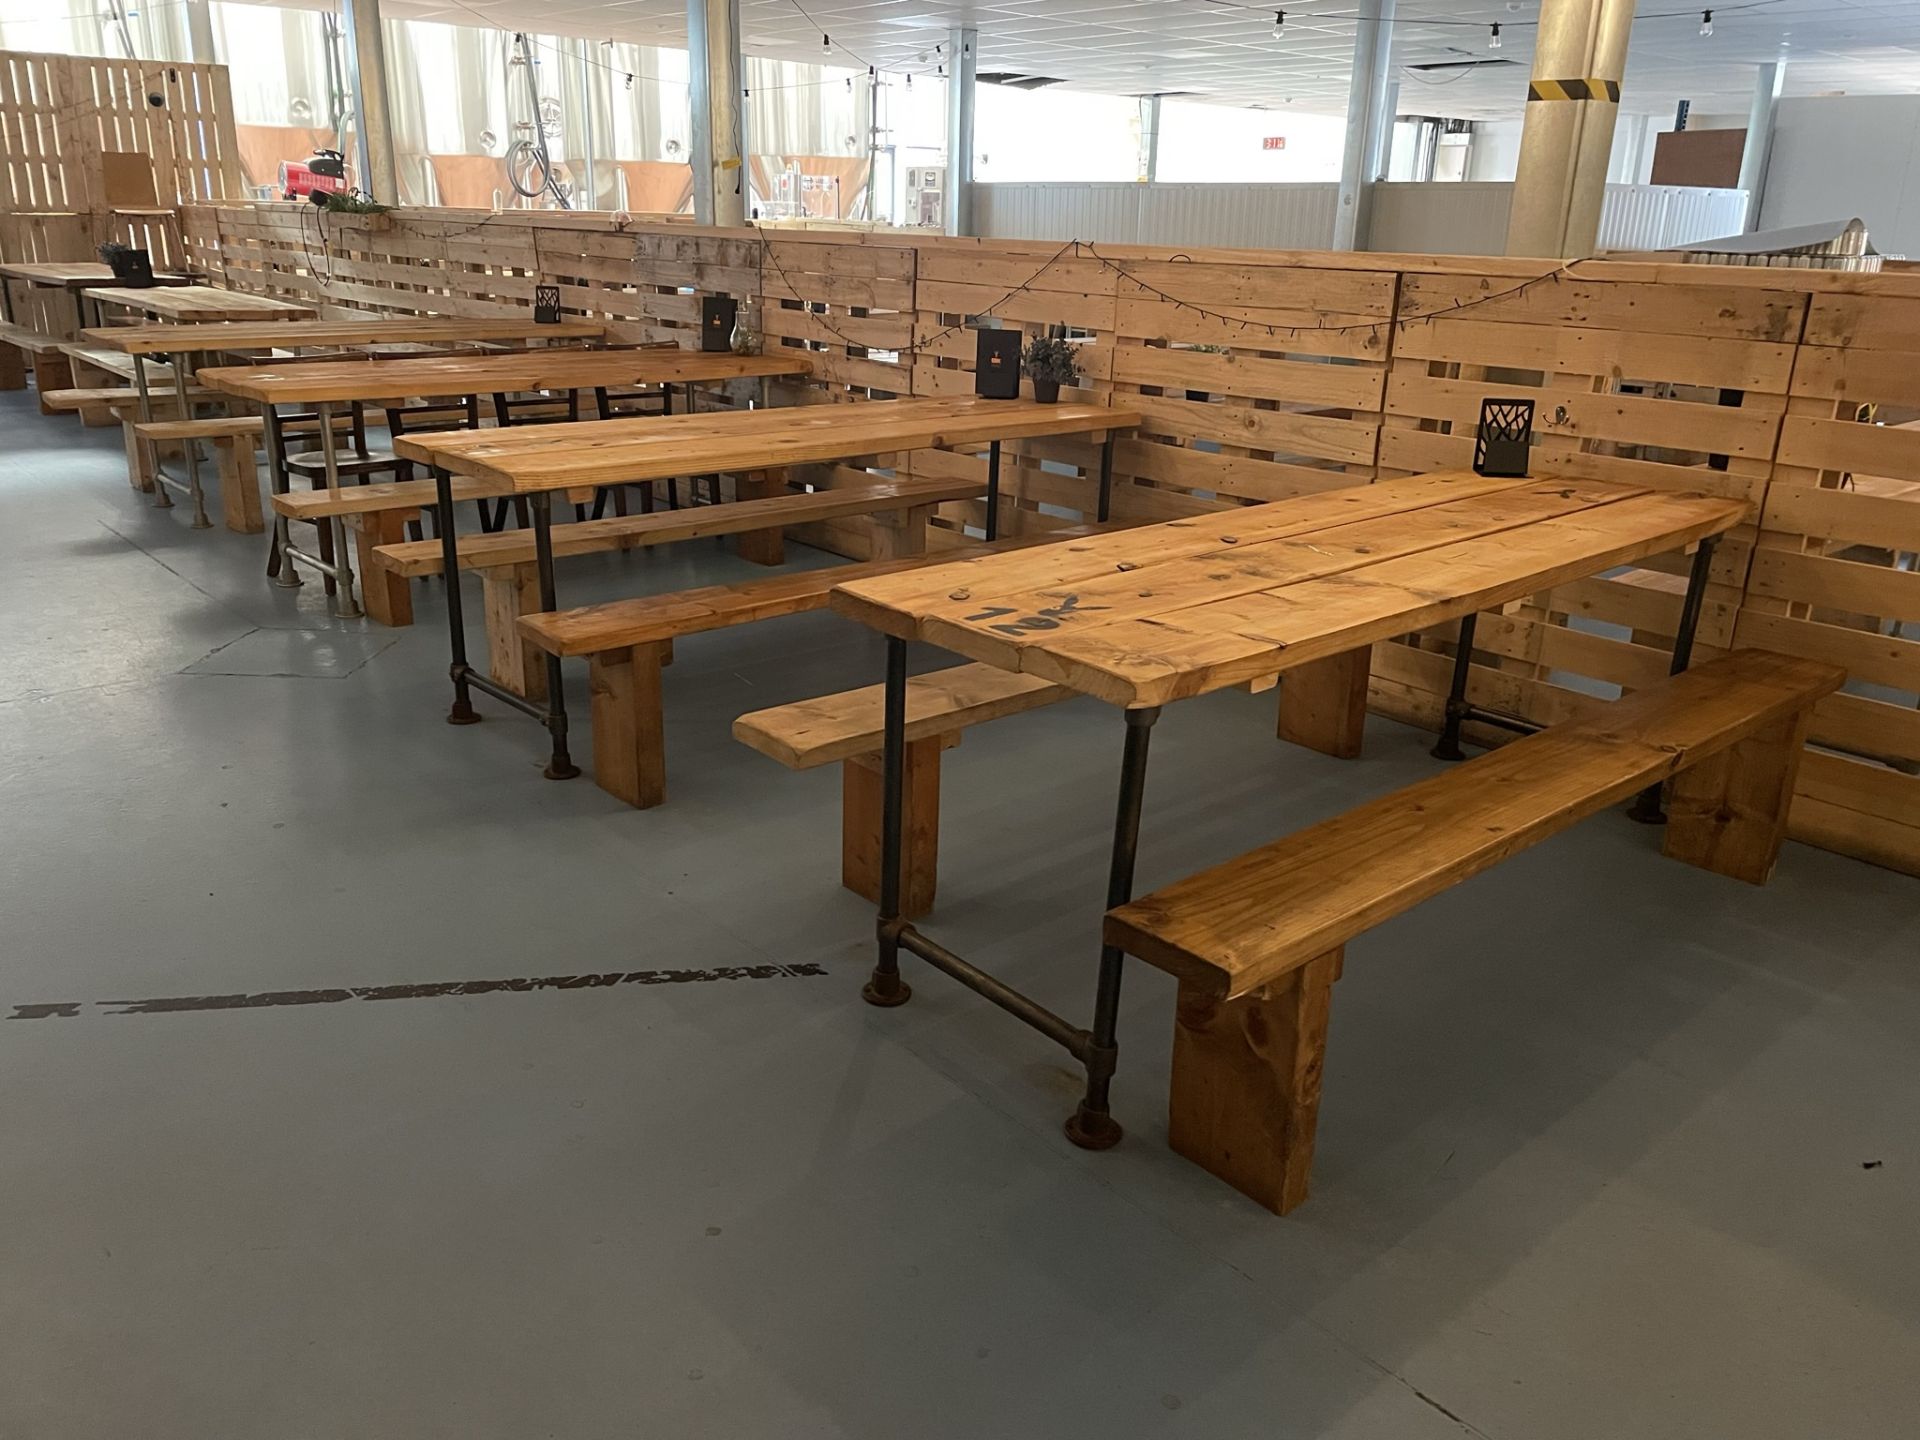 6 x Wooden Dining Tables w/ Metal Frames & 12 x Wooden Seating Benches